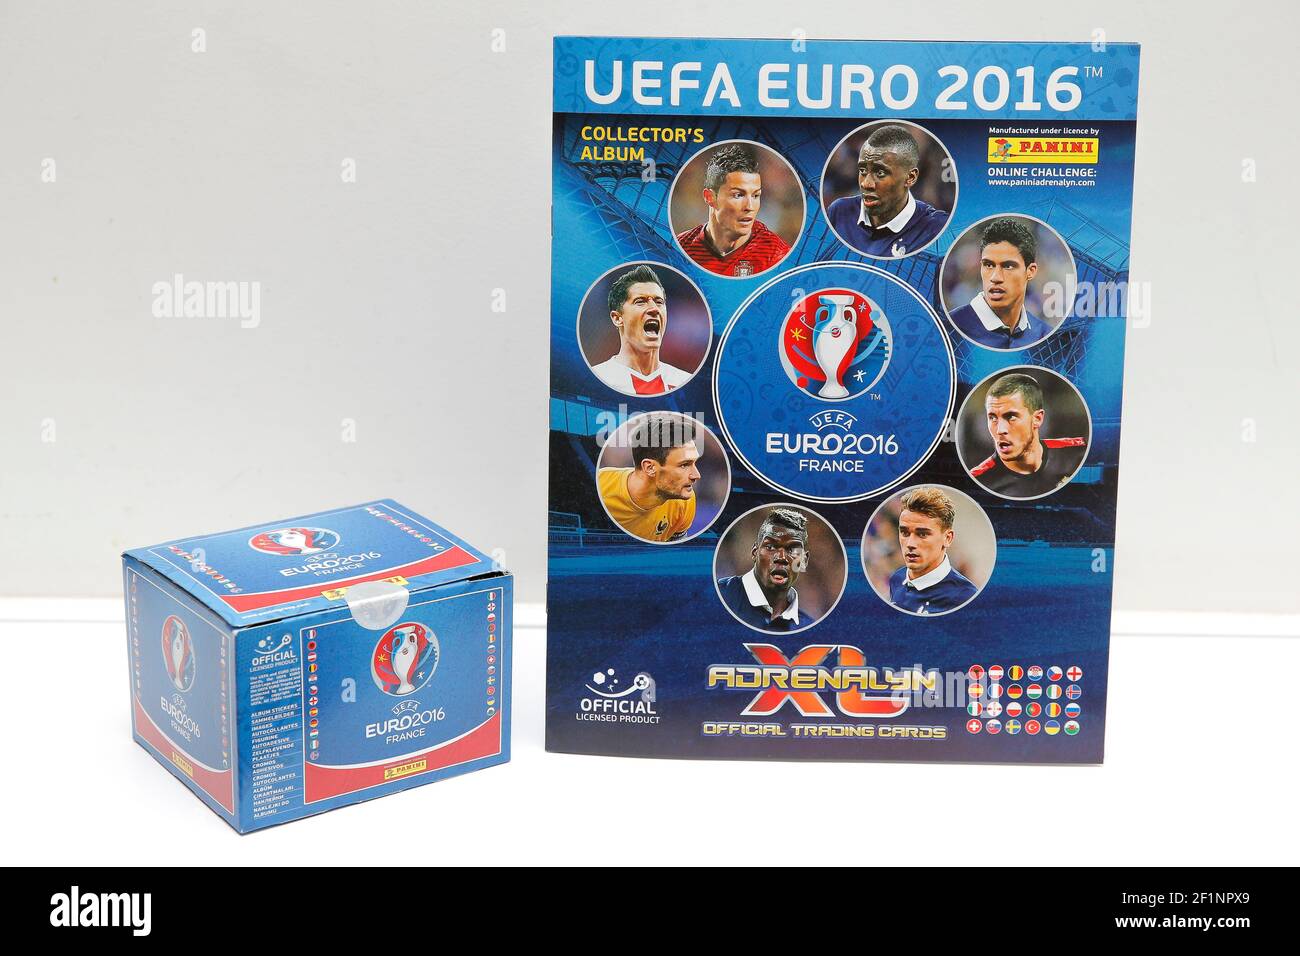 Collector's album and stickers box illustration during the Press Conference  of UEFA Euro 2016 Panini Album